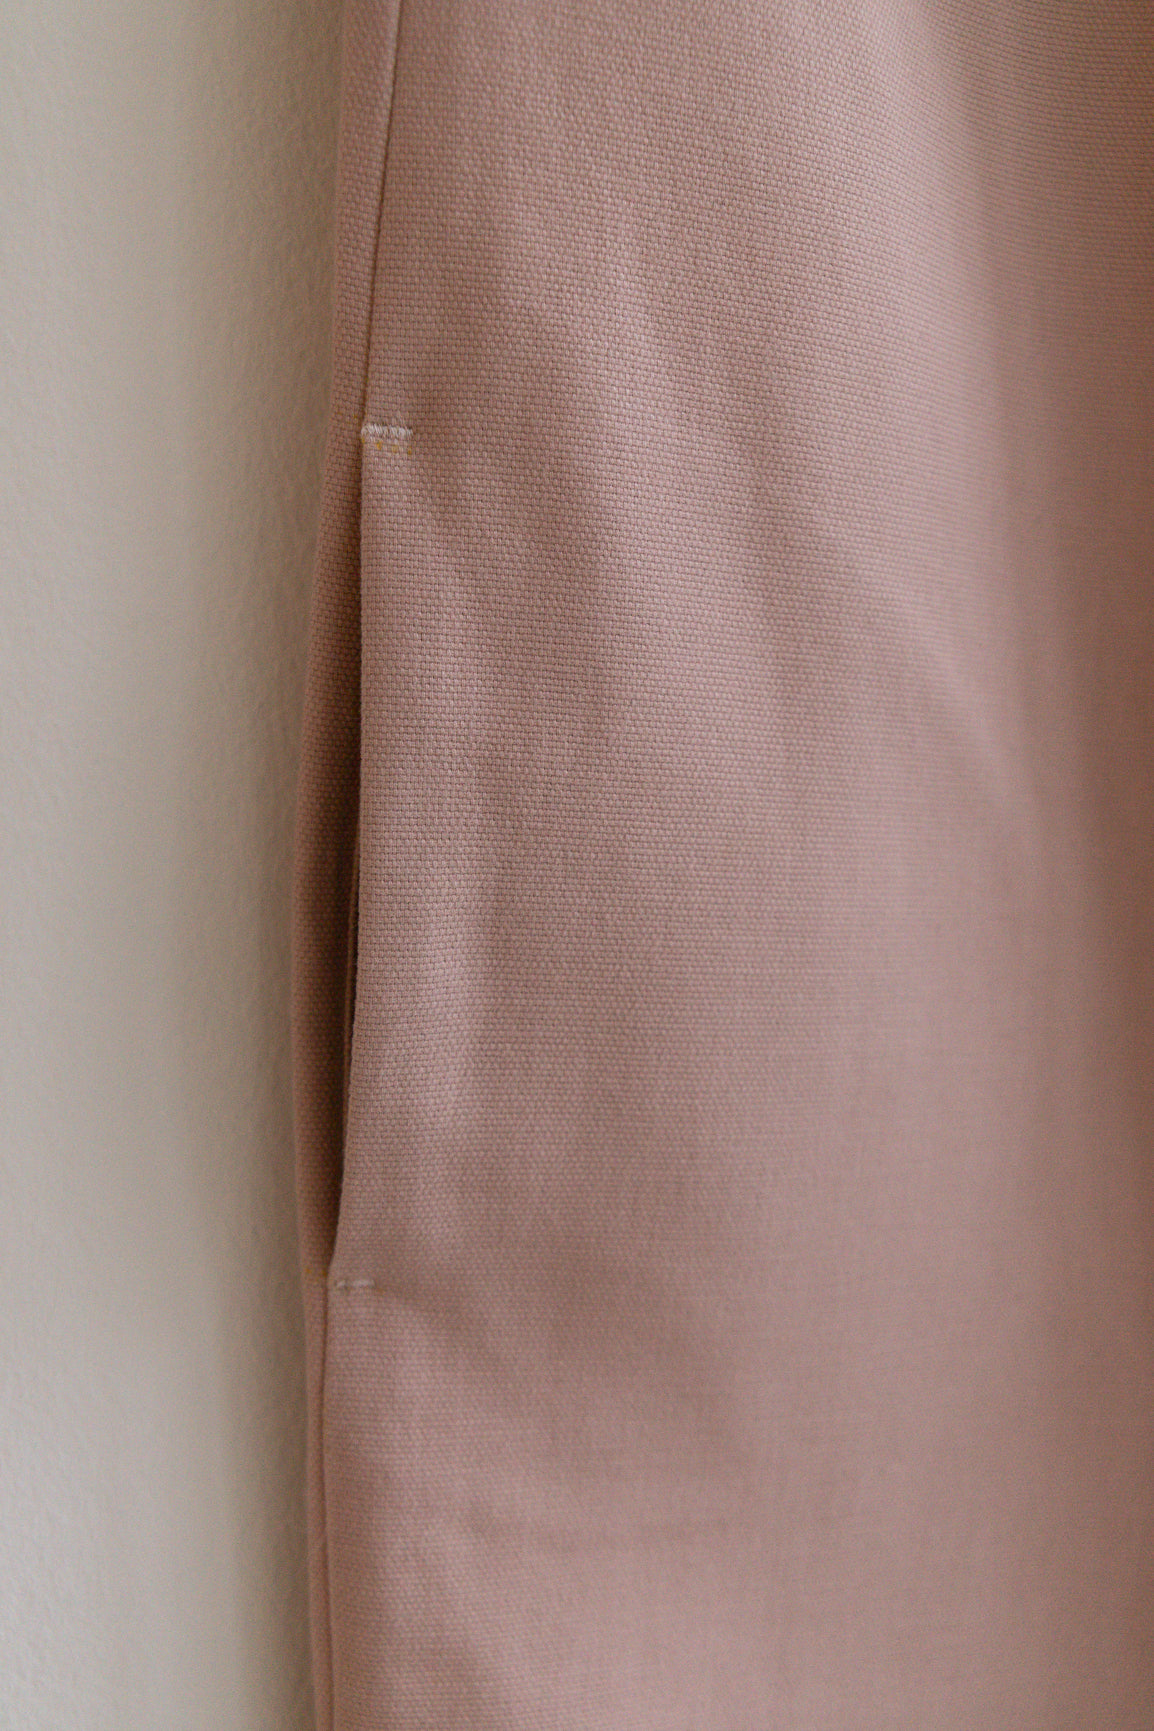 soft pink pastel pink tea rose color Jumpsuit overall workwear cotton canvas with pockets 5 buttons v-neck tall girls short girls oeko-tex sustainable clothes handmade